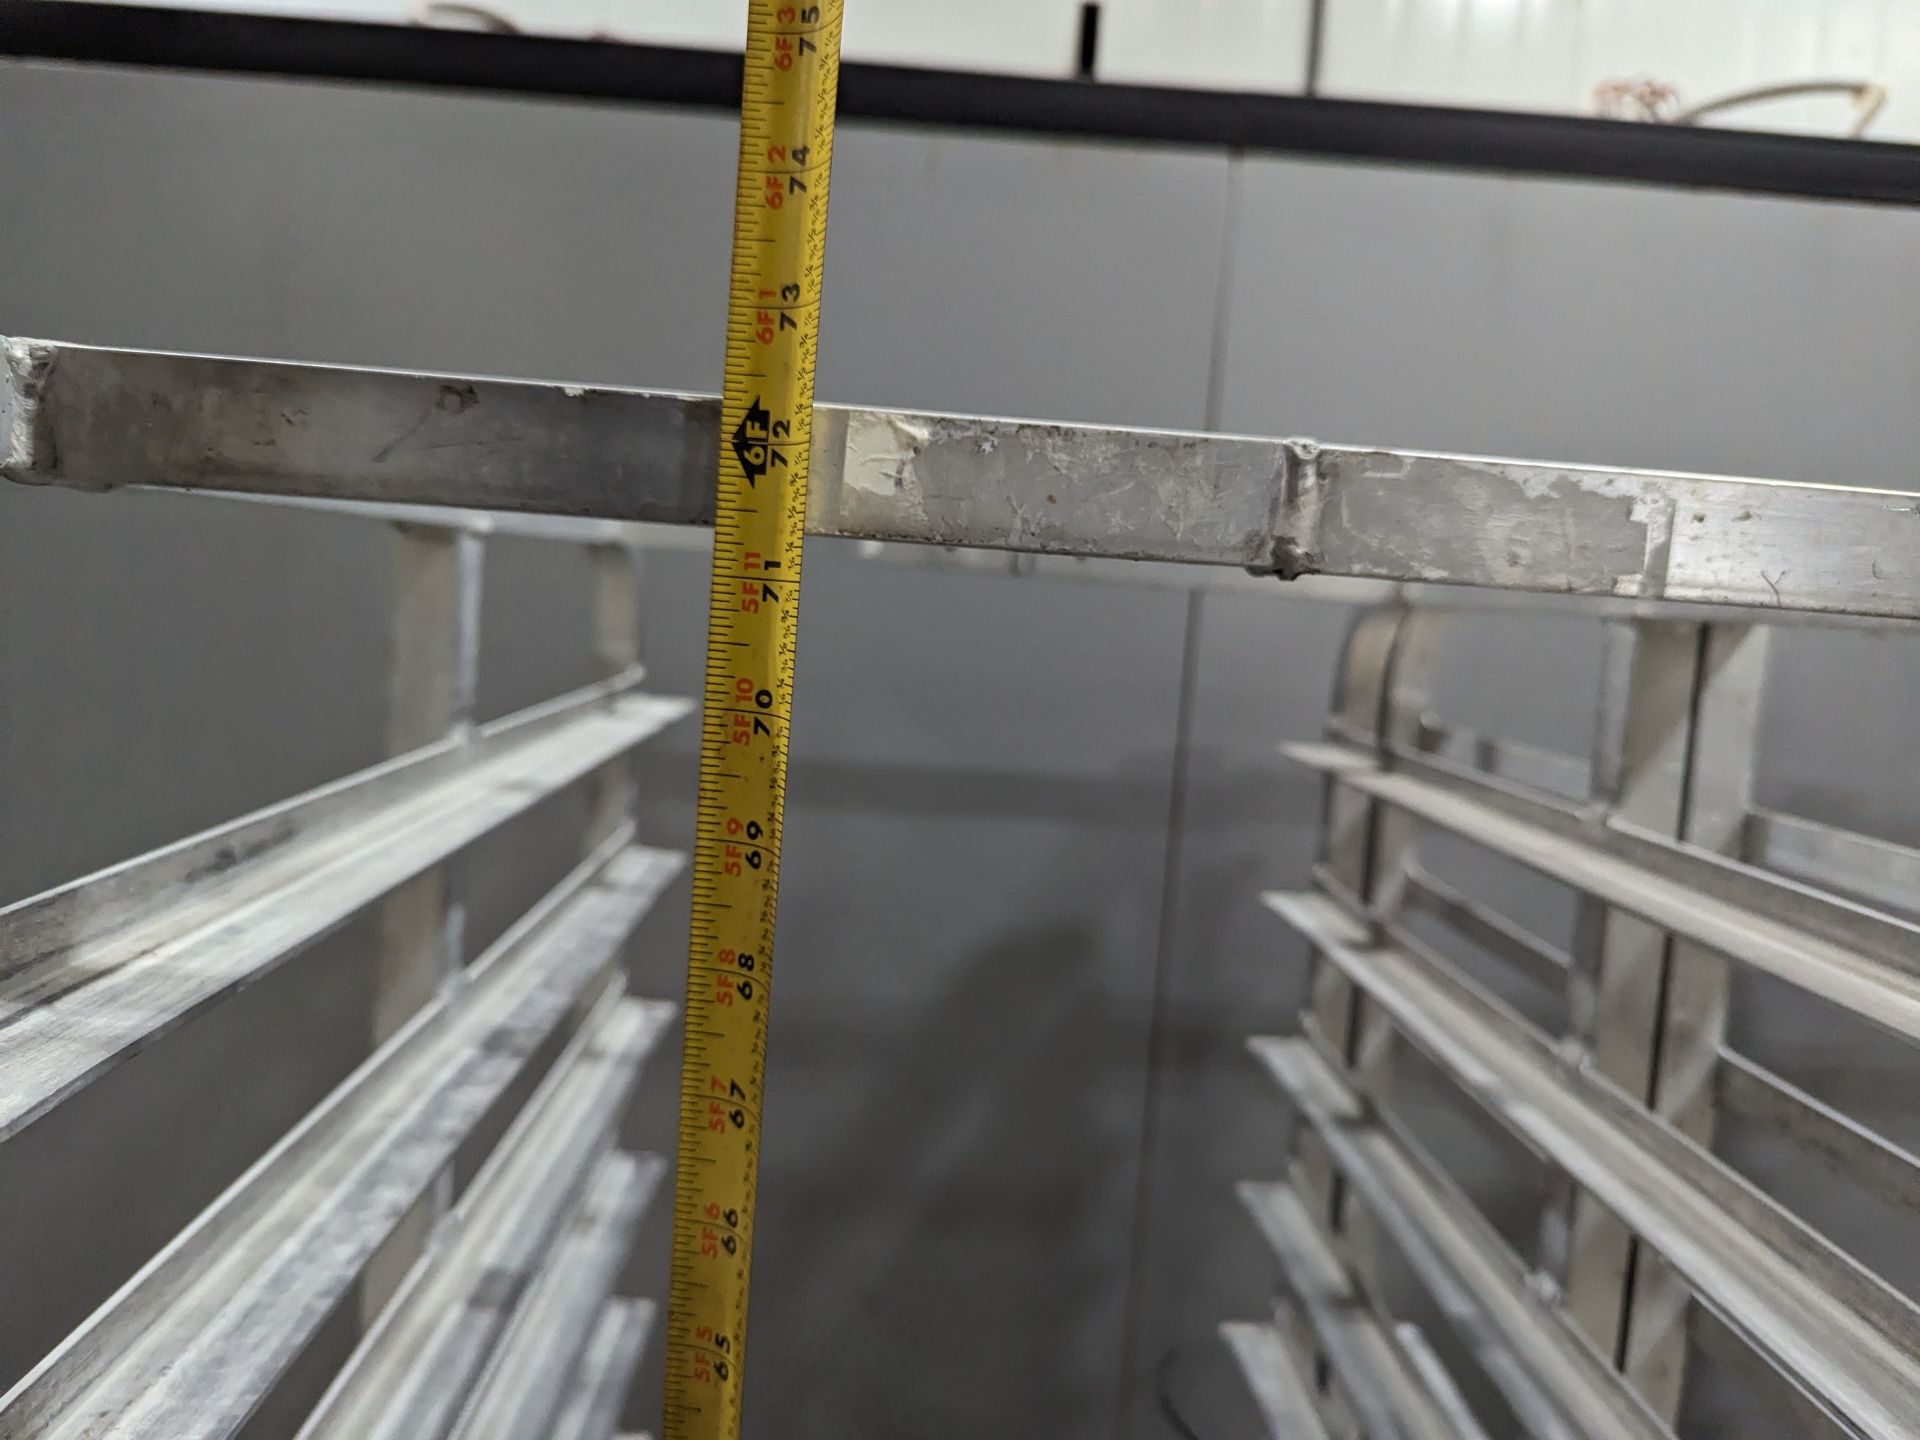 Lot of 3 Aluminum Racks, Dimensions LxWxH: 57x37x69 Measurements are for lot of 3 together - Image 6 of 6